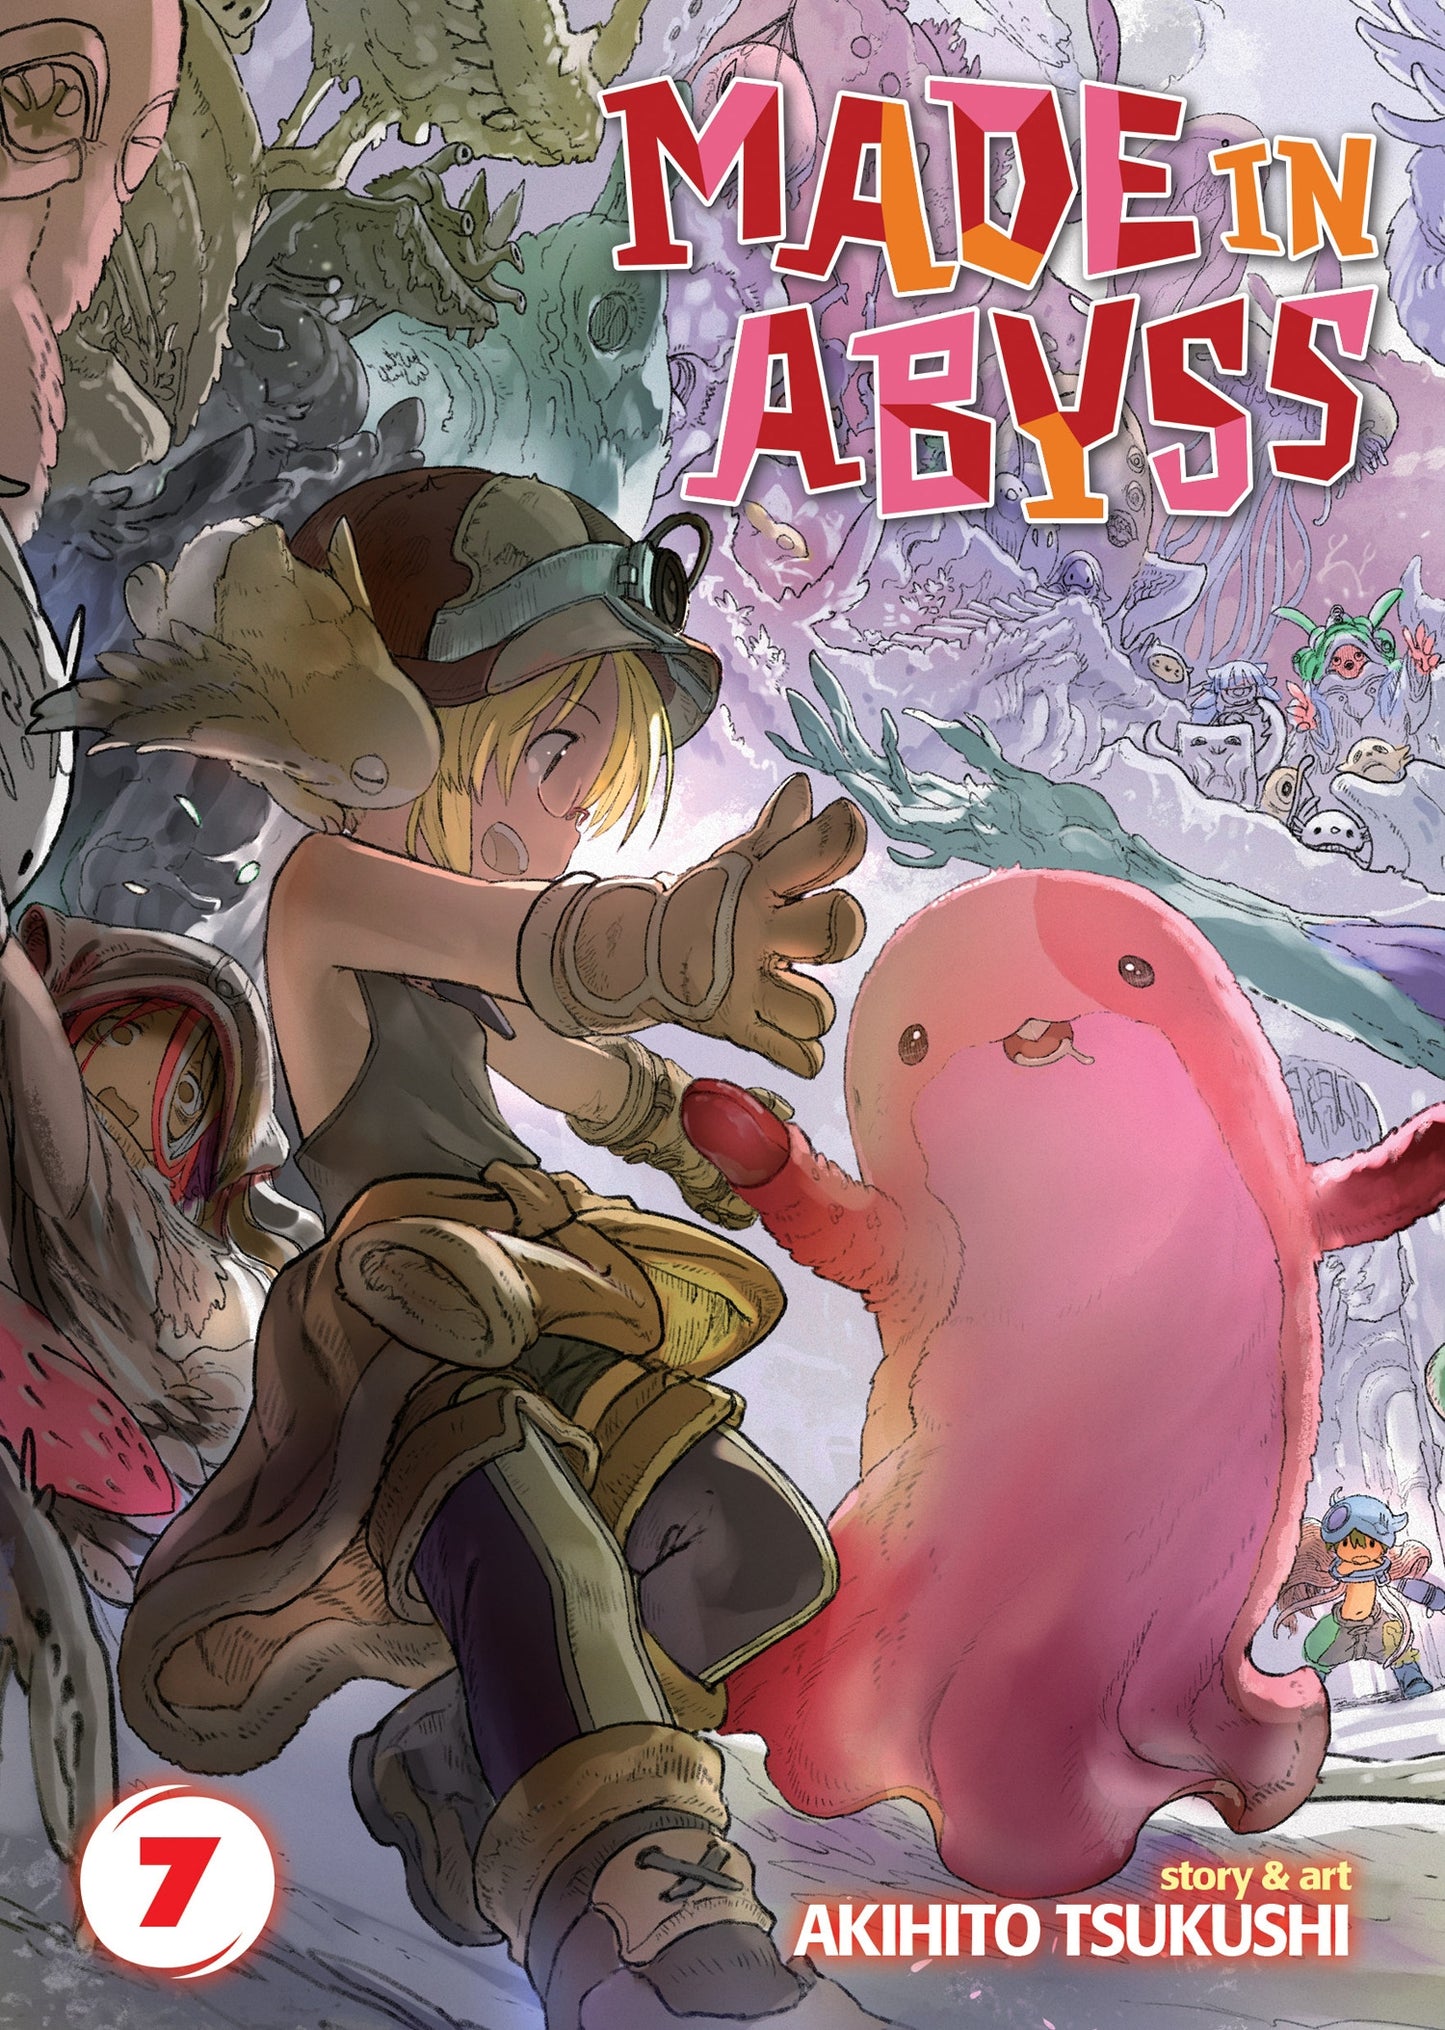 Made in Abyss Vol. 7 - Manga Warehouse